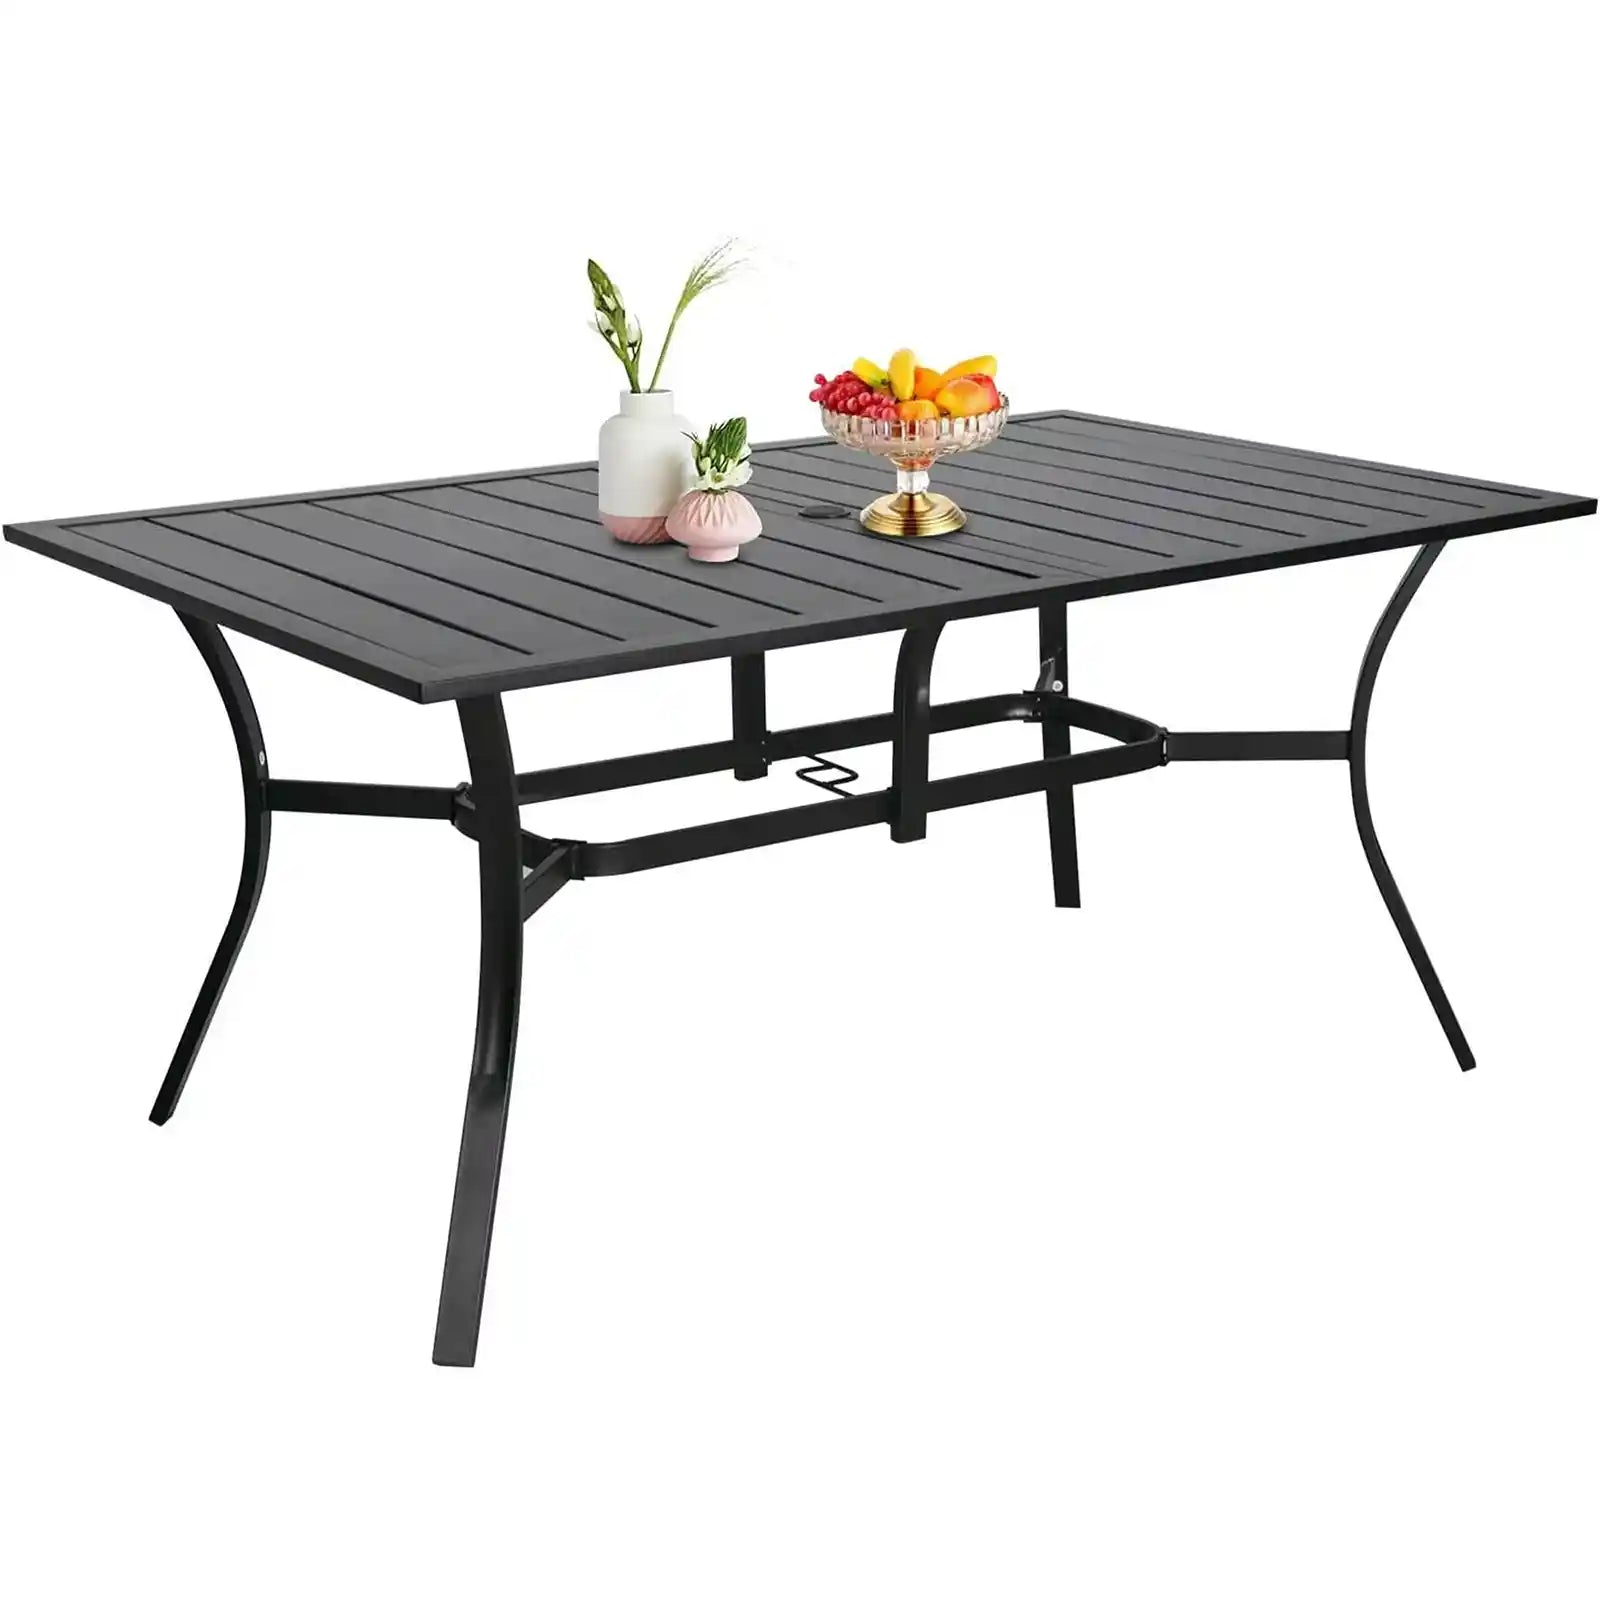 Outdoor Dining Table Patio Steel Slat Rectangle Table for 6-Person with Umbrella Hole